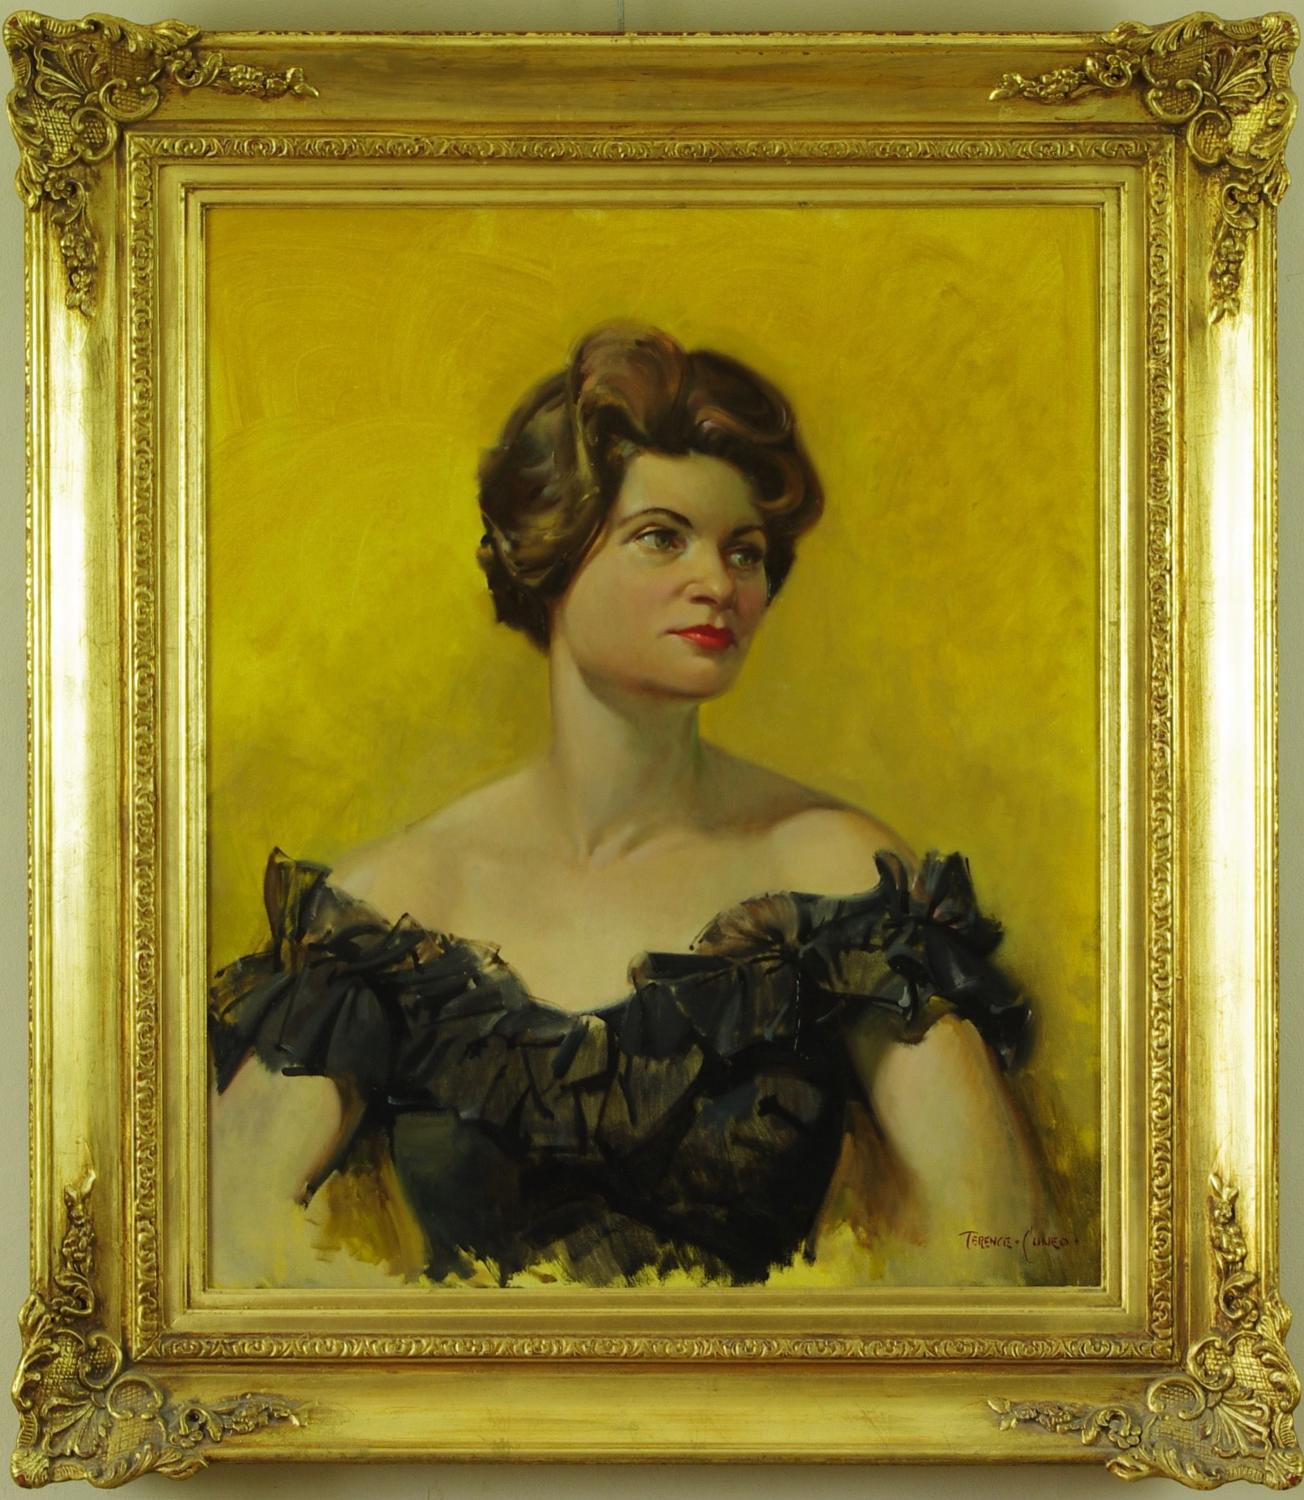 Gladys Symondson, by Terence Cuneo 1963